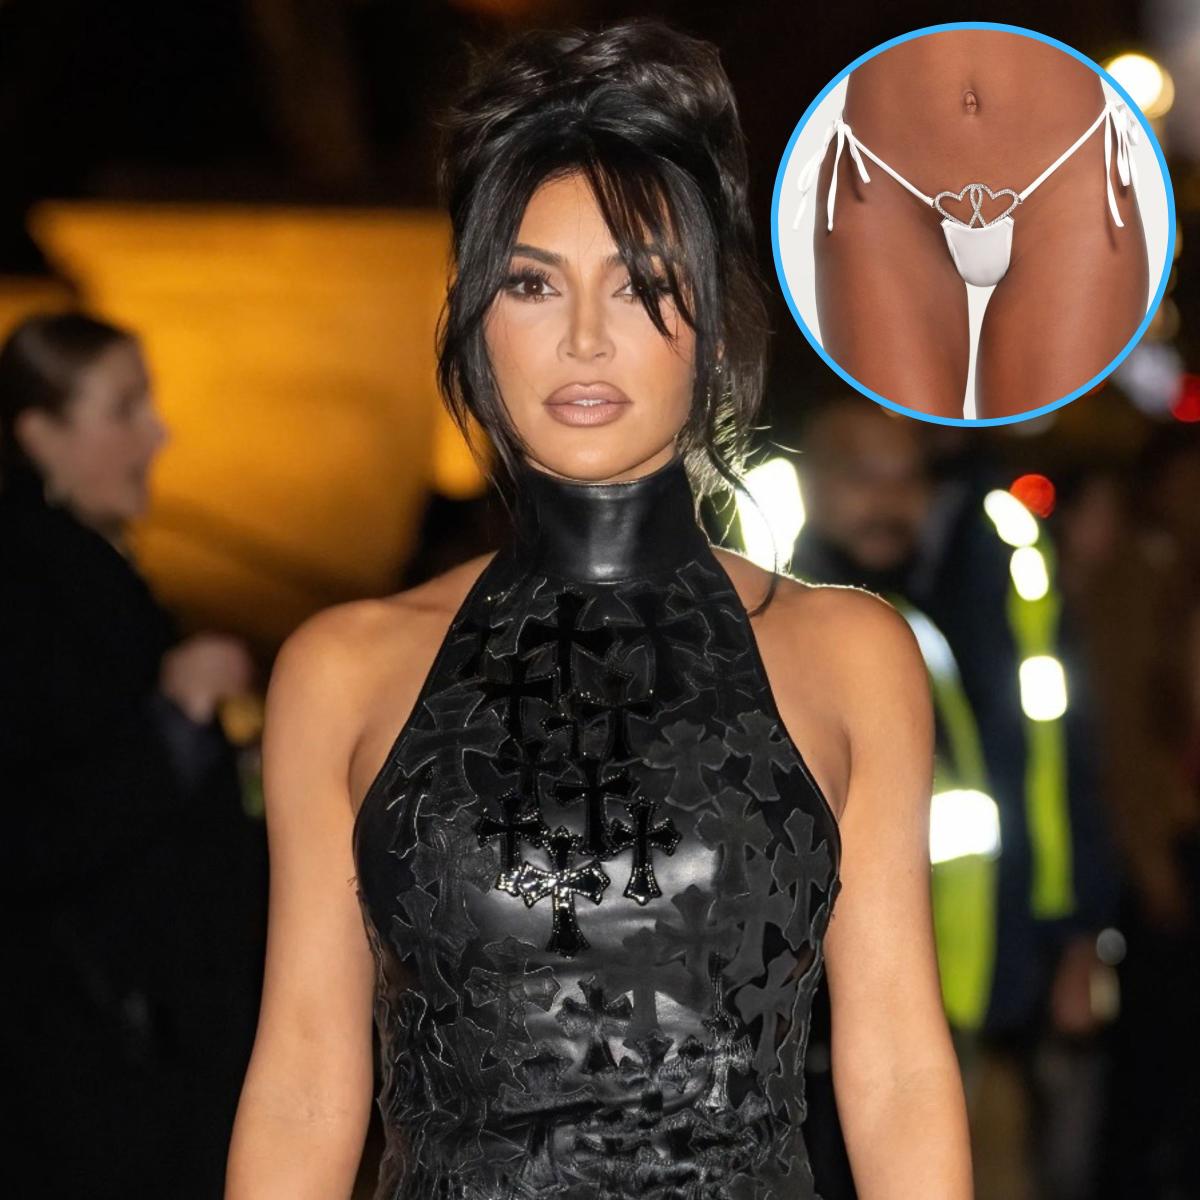 Kim Kardashian's 'Fits Everybody' Micro Thong Slammed For Being Too Small